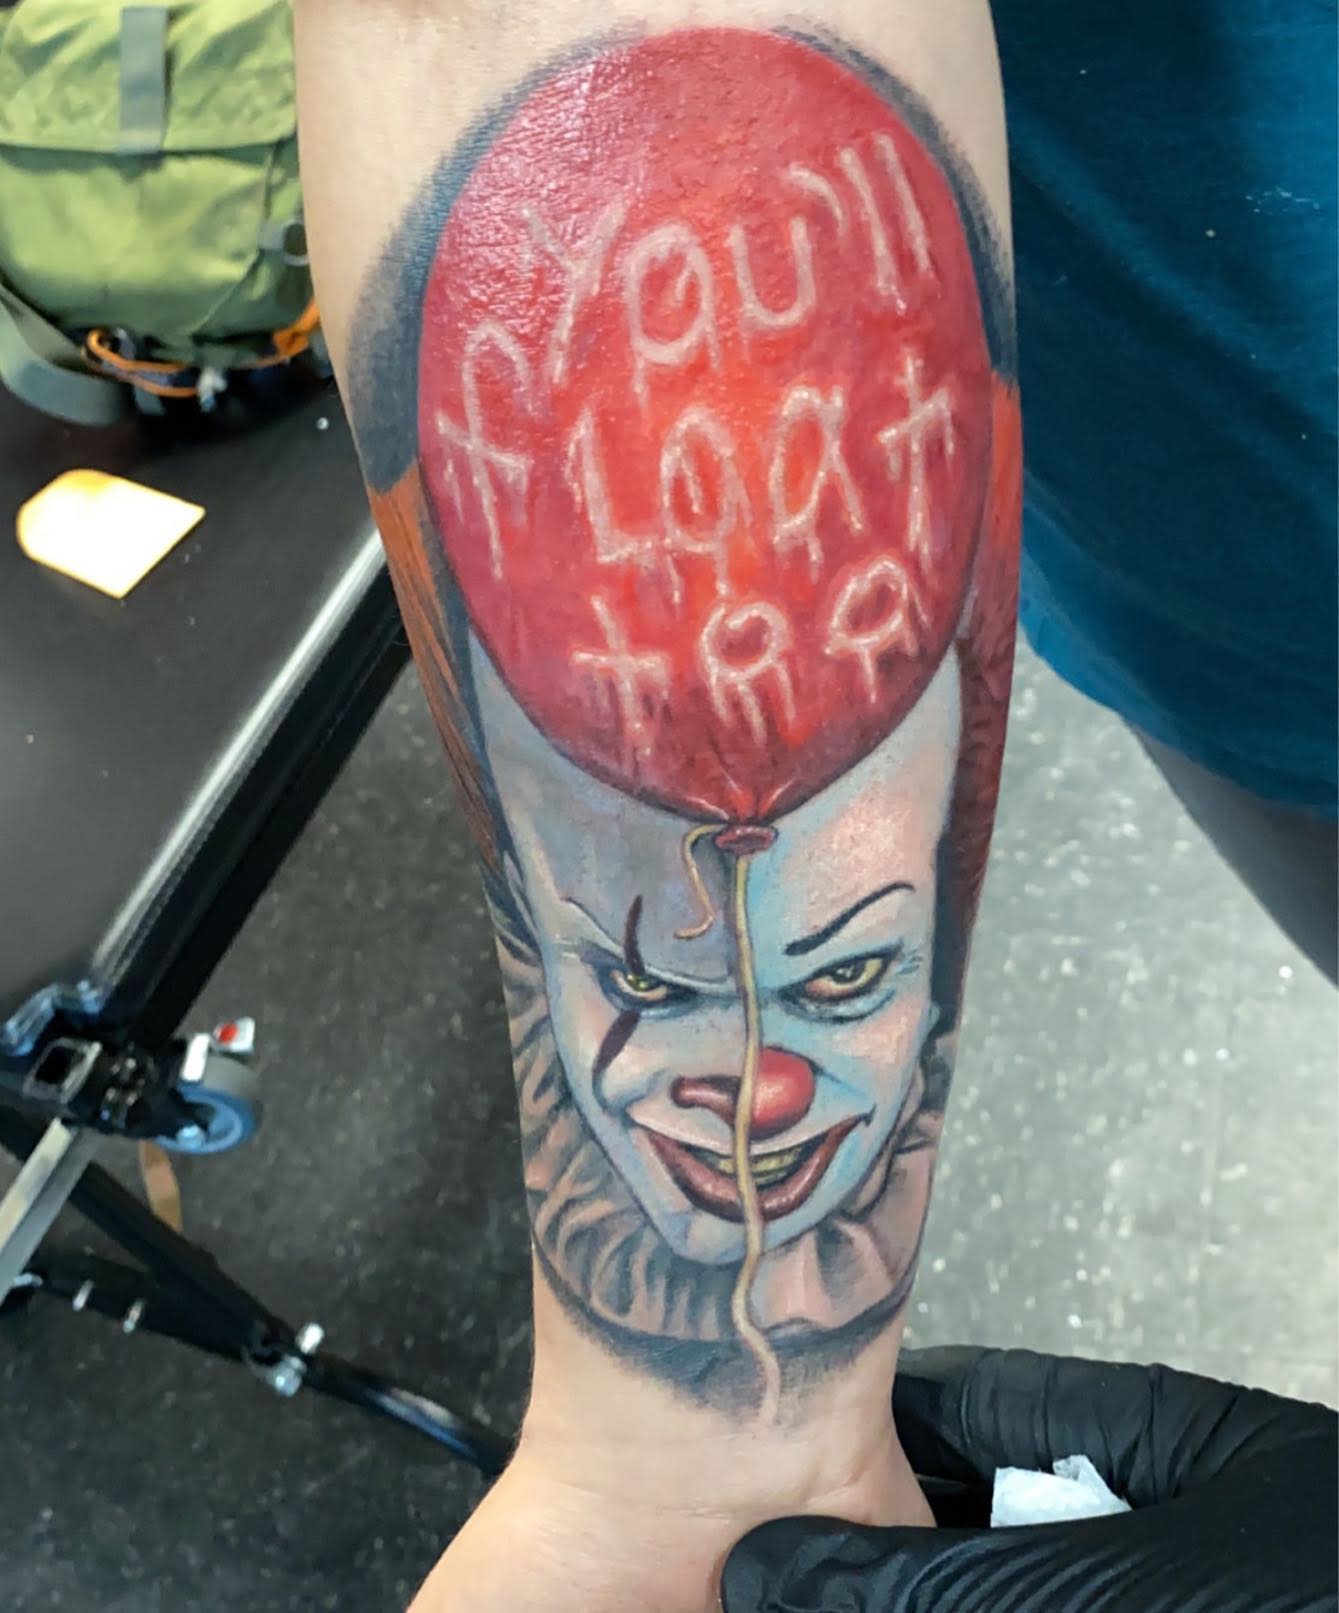 Youll Float Too by Drew Siciliano TattooNOW